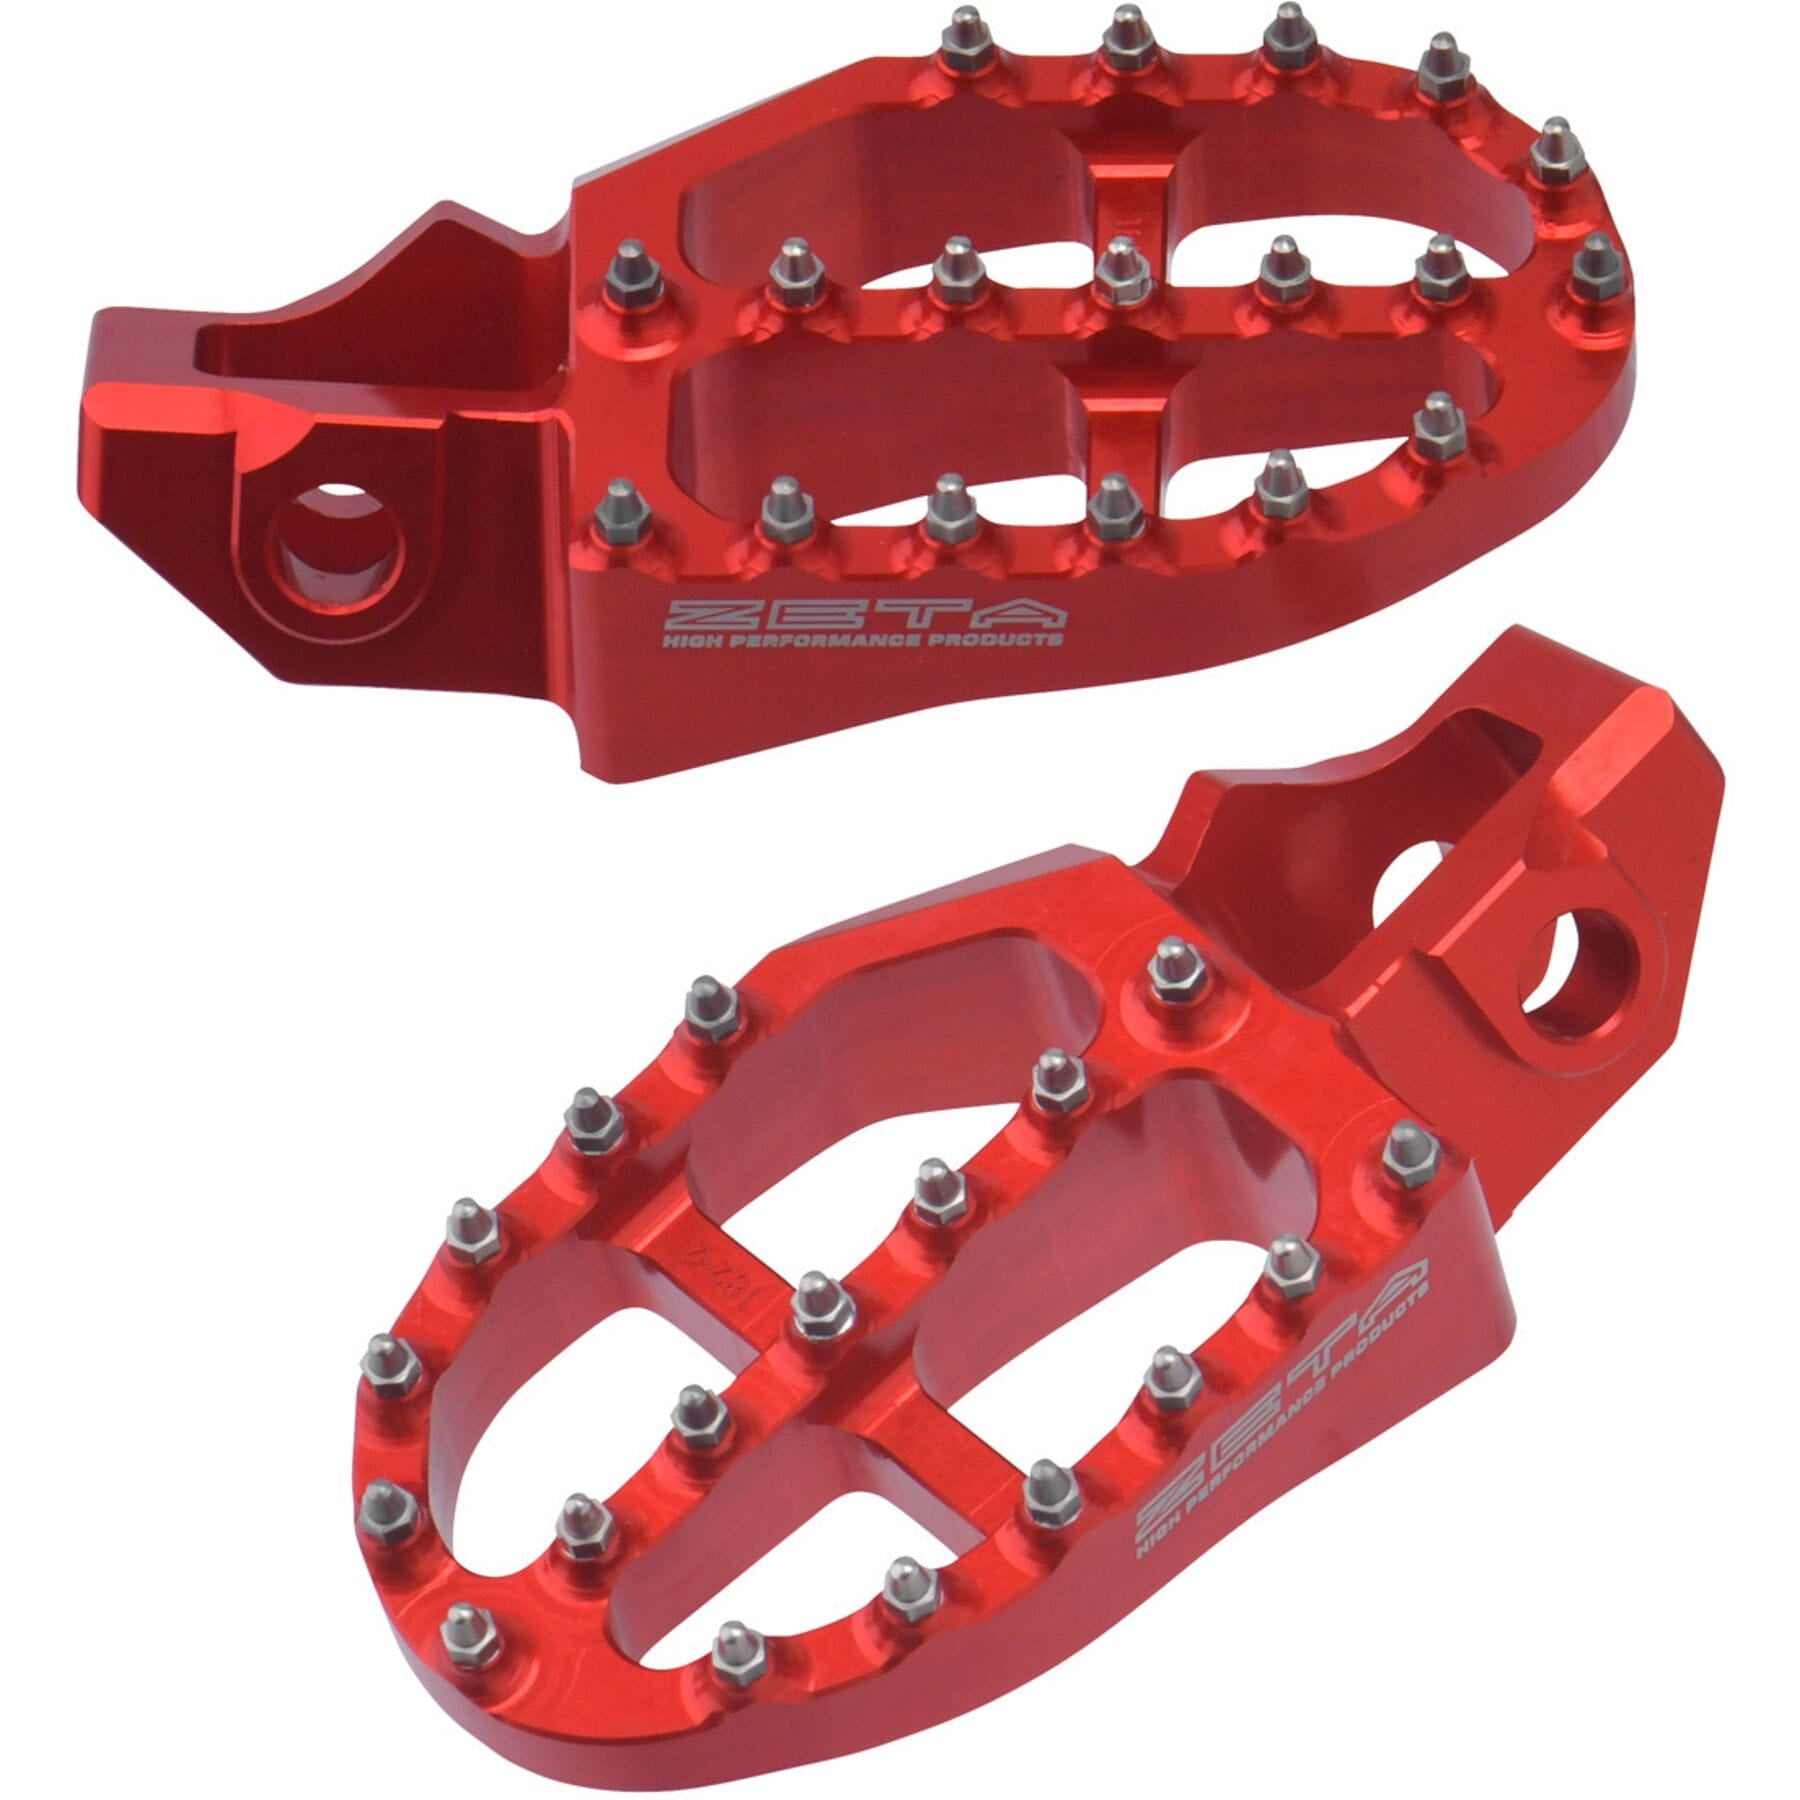 Red Aluminum FootPegs for GASGAS MC/EC Motorcycles